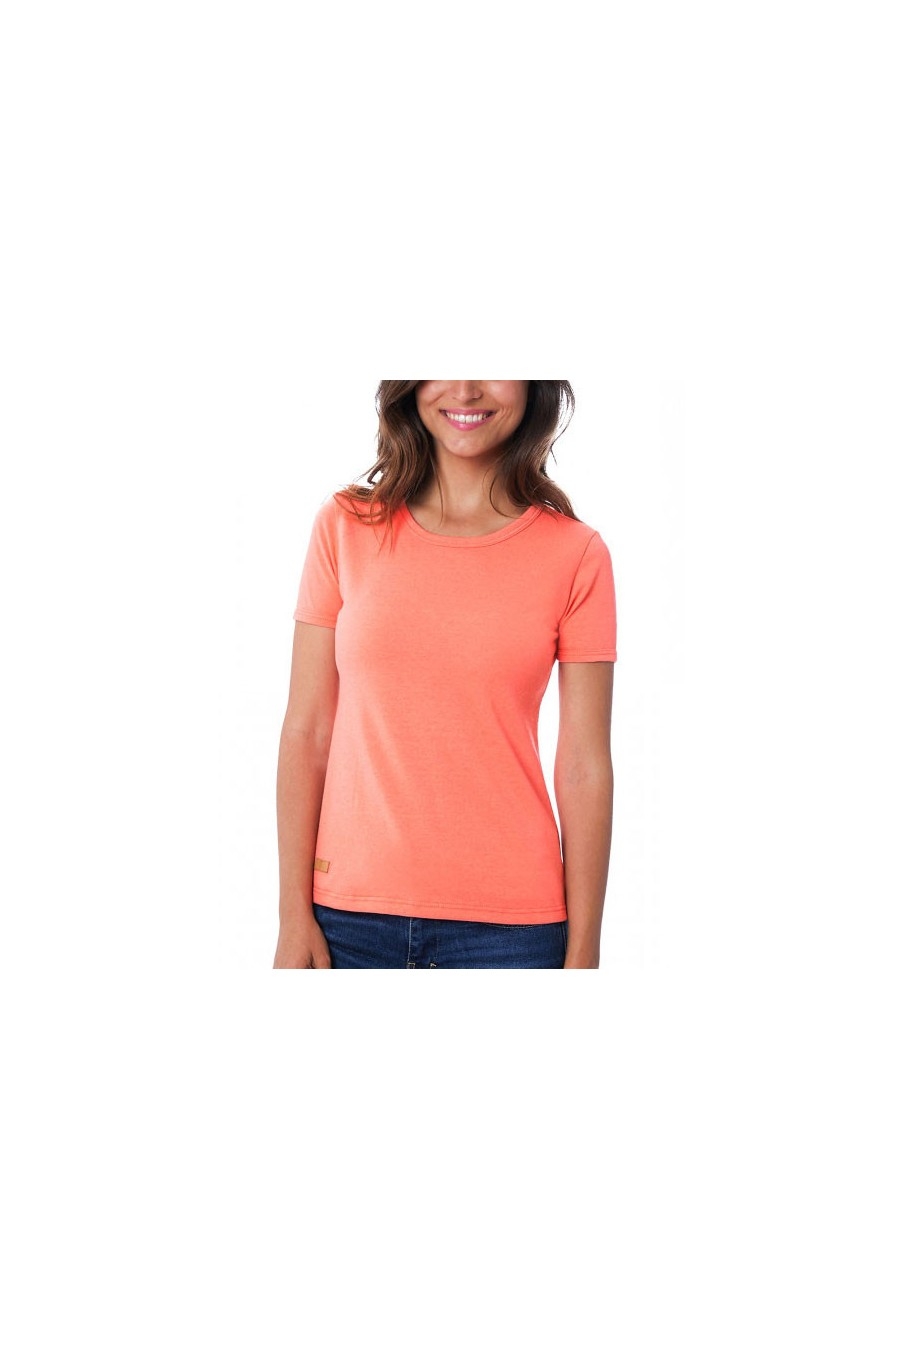 T-SHIRT FEMME MANCHE COURTE COL ROND CORAIL - Made in France & 100% Recyclé